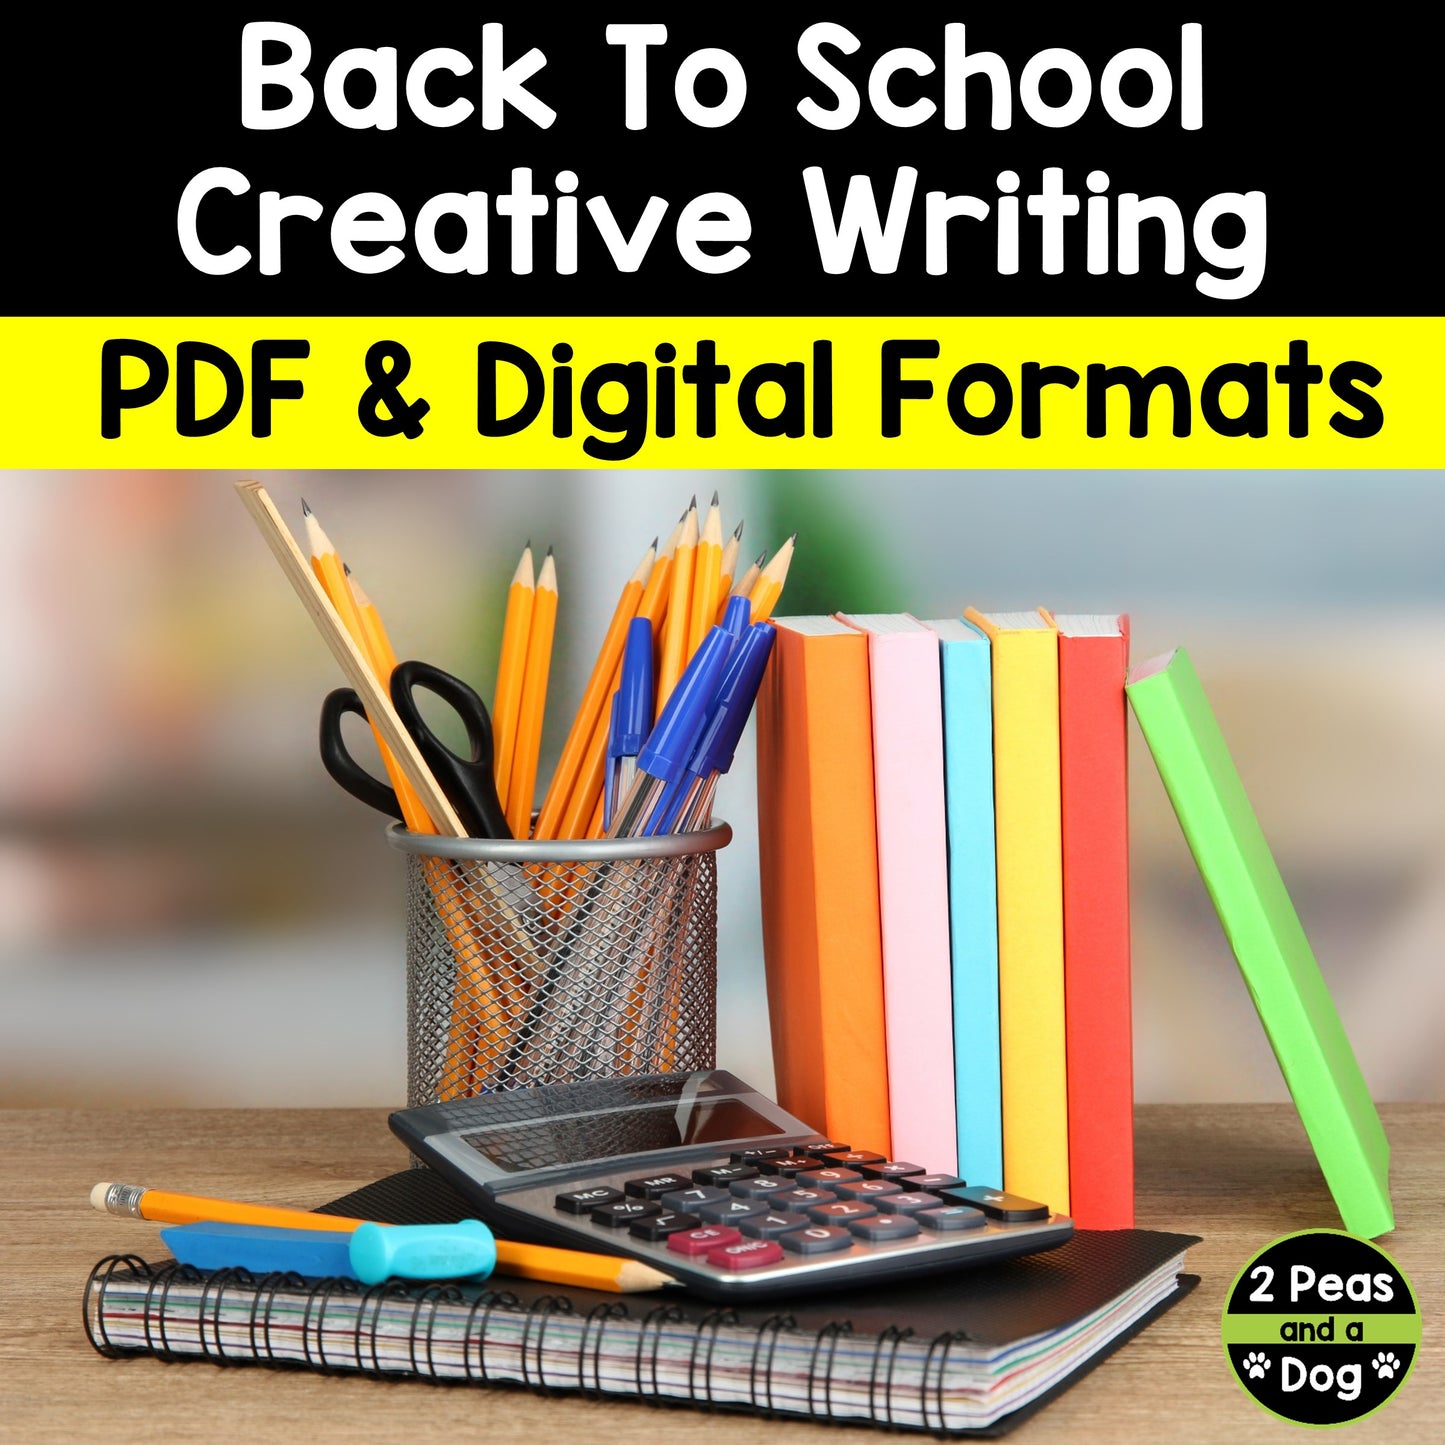 Back to School Creative Writing Assignment